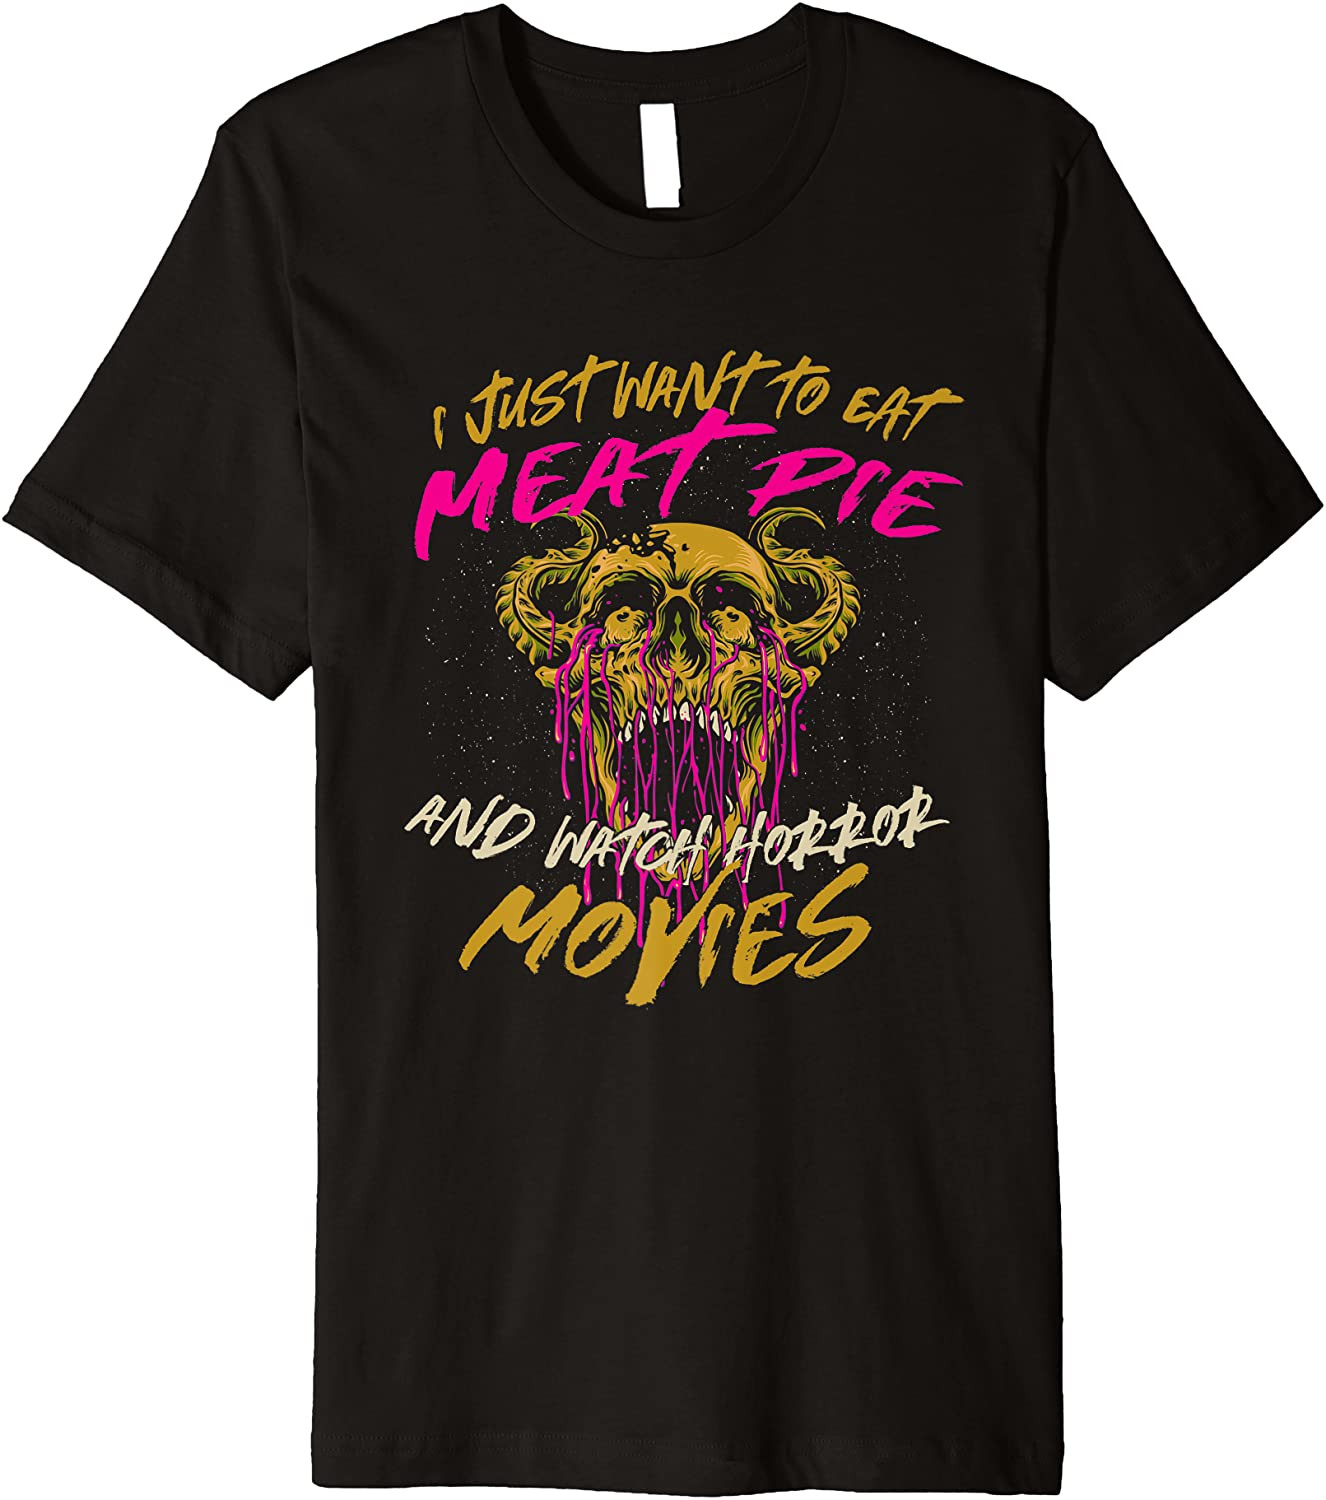 Eat Meat Pie And Watch Horror Movies Comfort Food Pie Lover T-Shirt